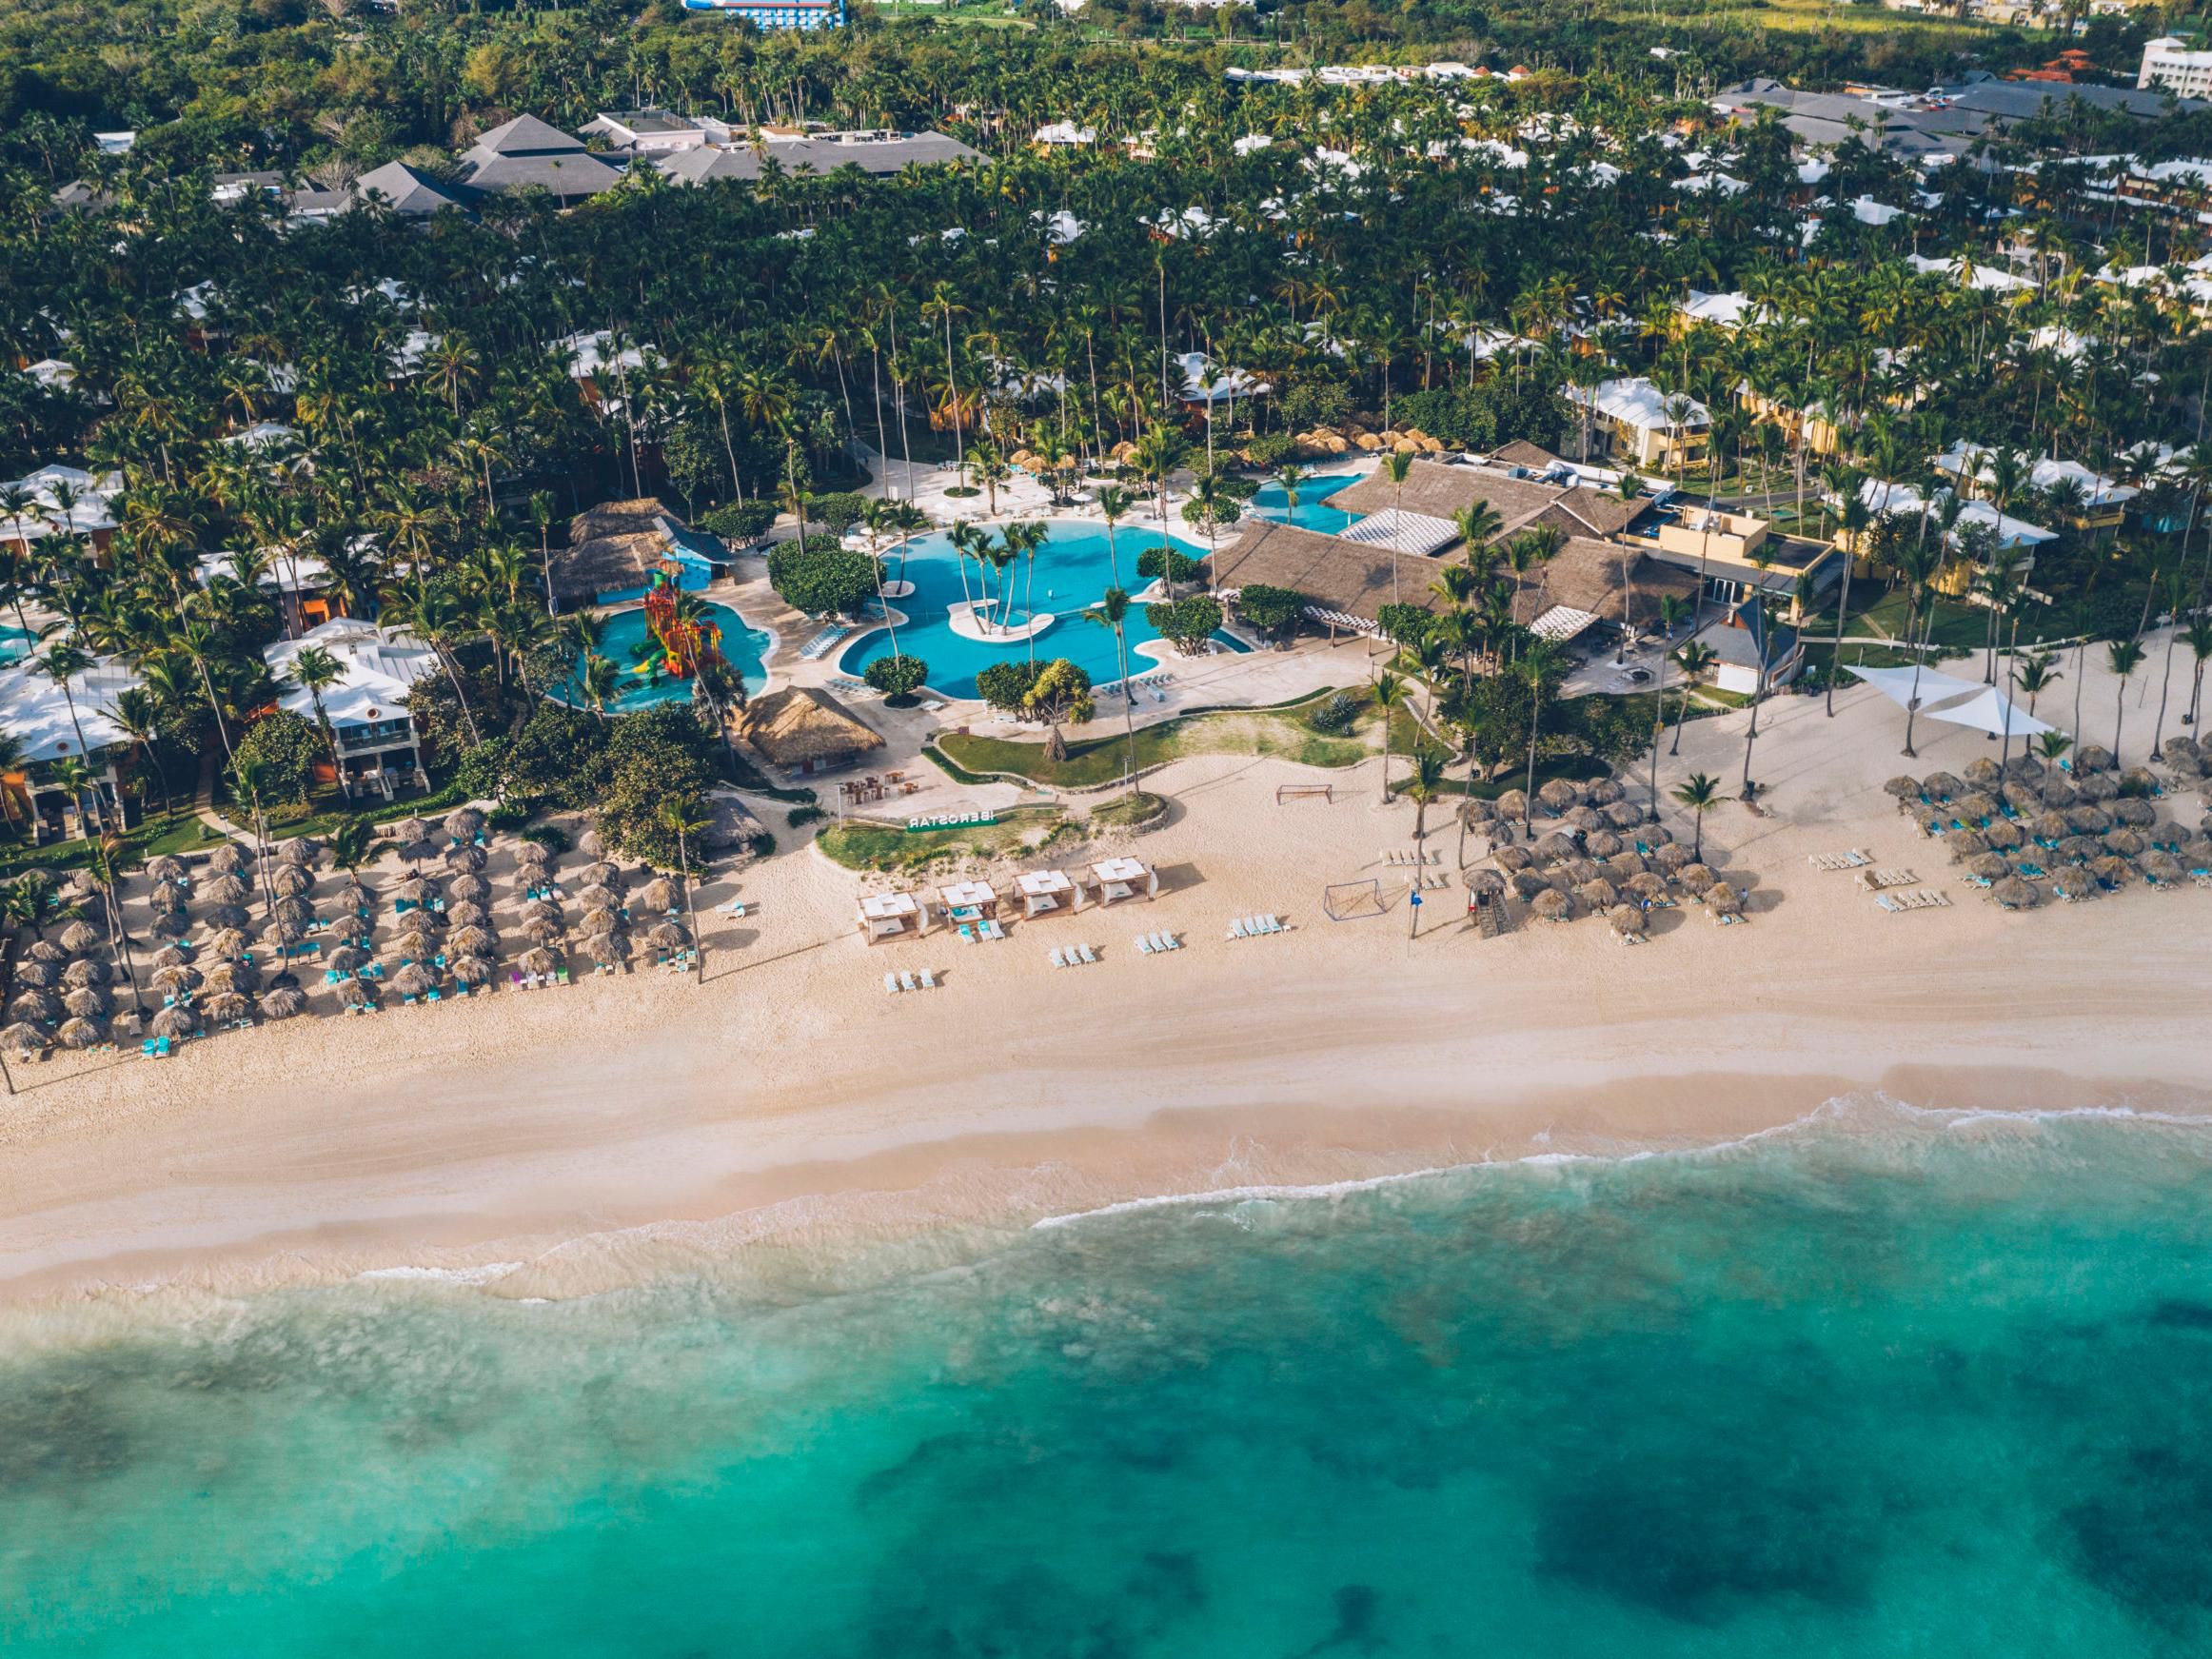 View of beach and resort from above